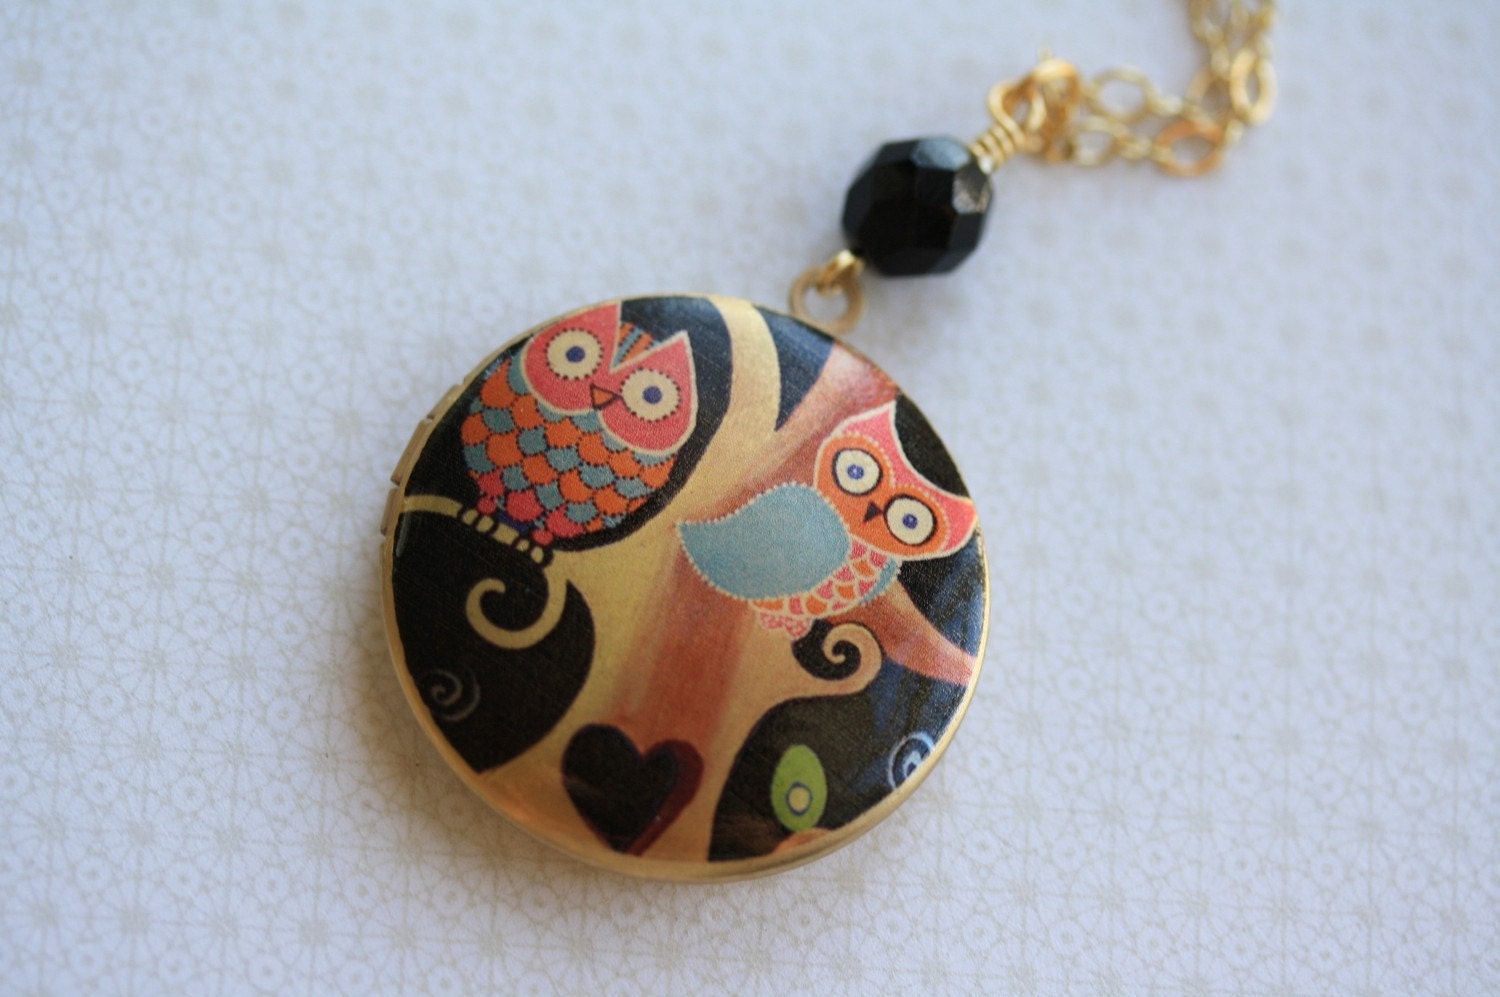 The Whimsical Perching Owls Locket Necklace